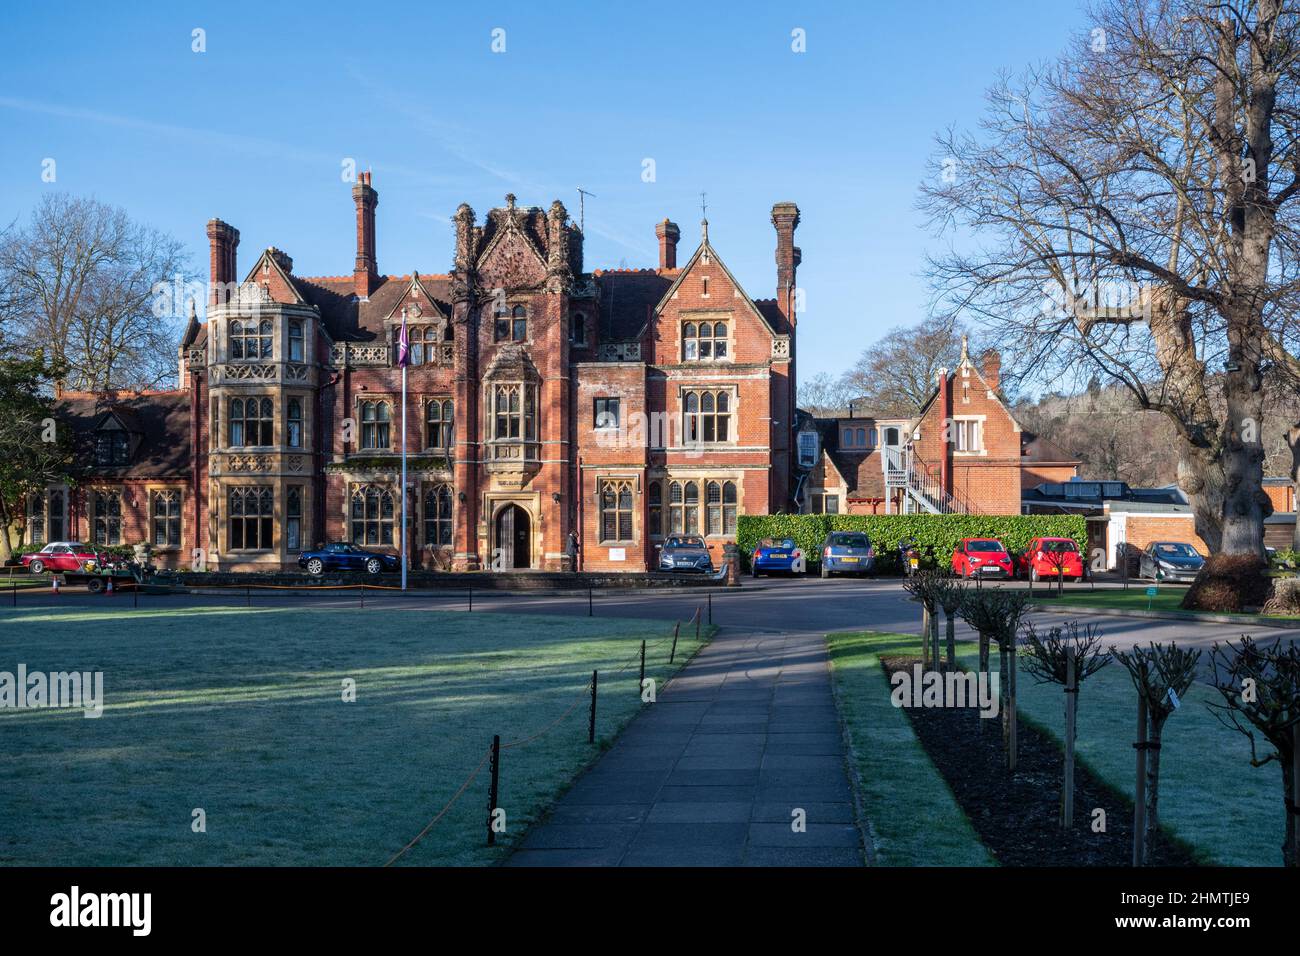 Box Hill School in Mickleham village, Surrey, England, UK, during winter. View of Dalewood House, the main school building, dating from 1883. Stock Photo